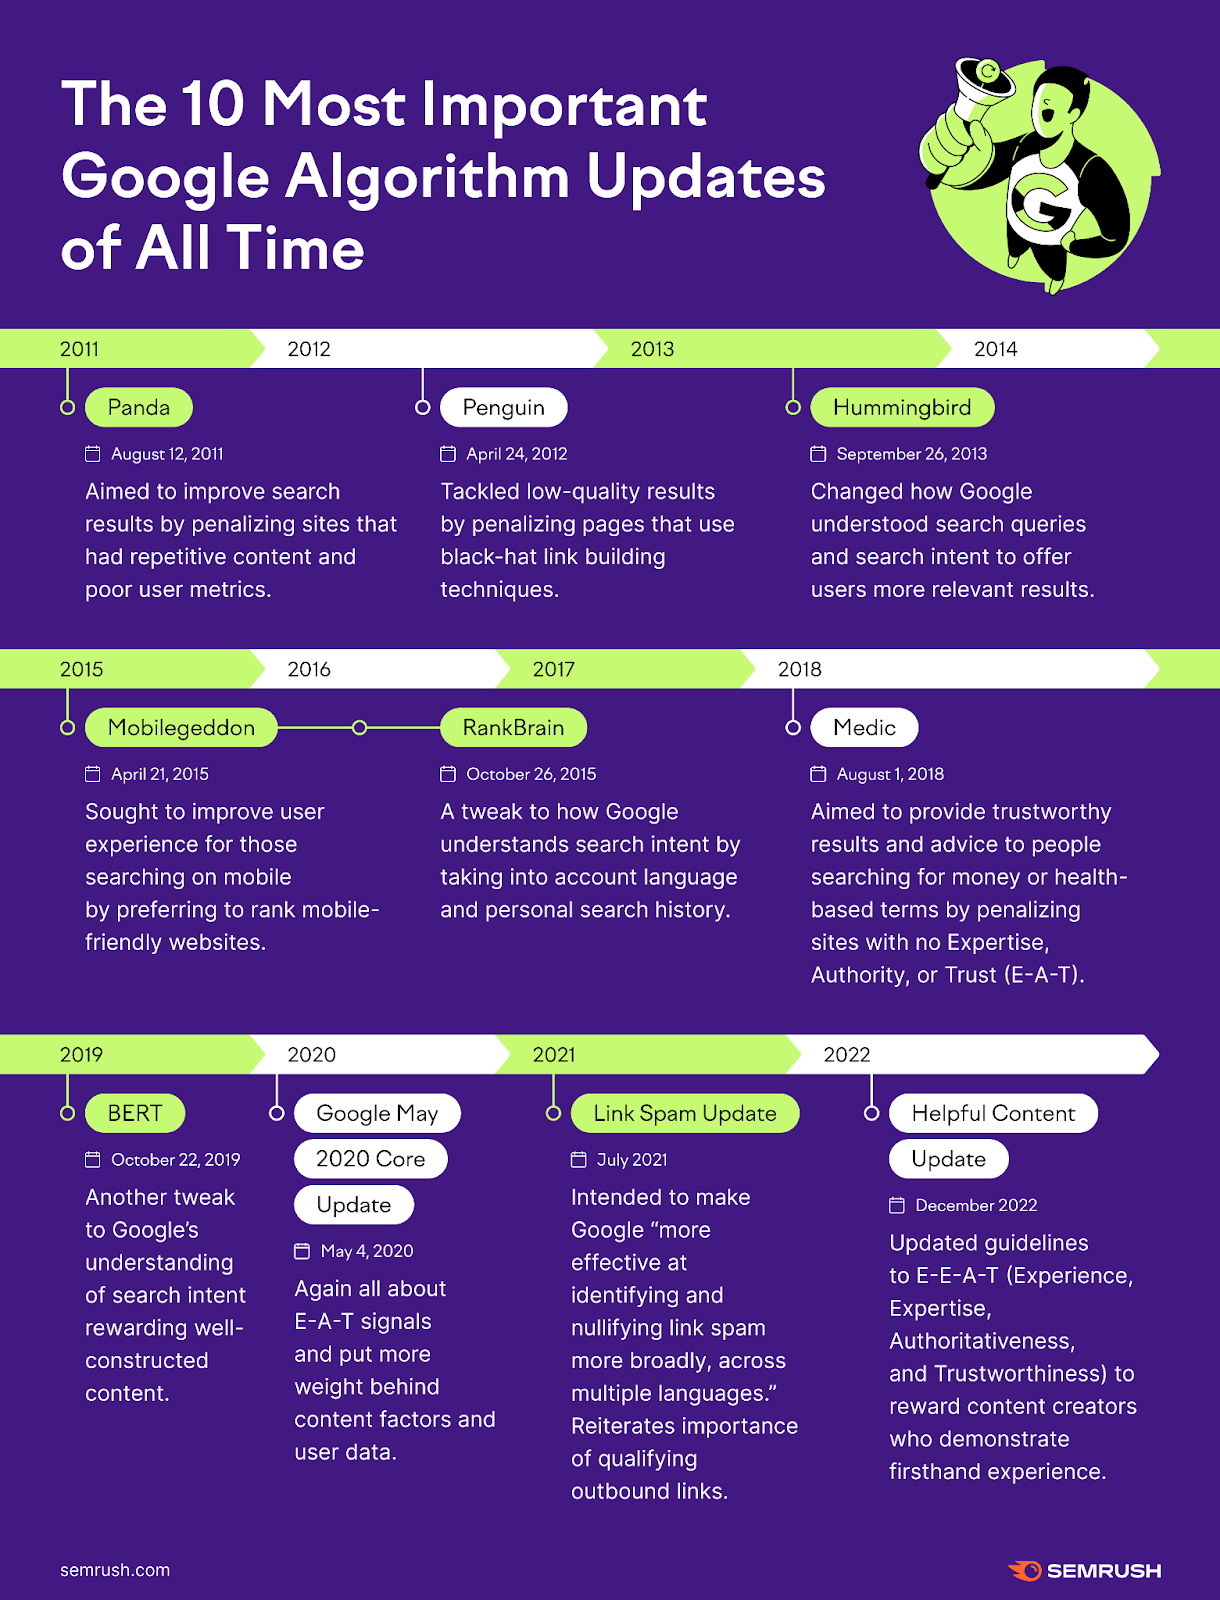 An infographic by Semrush mapping the 10 most important Google algorithm updates of all time